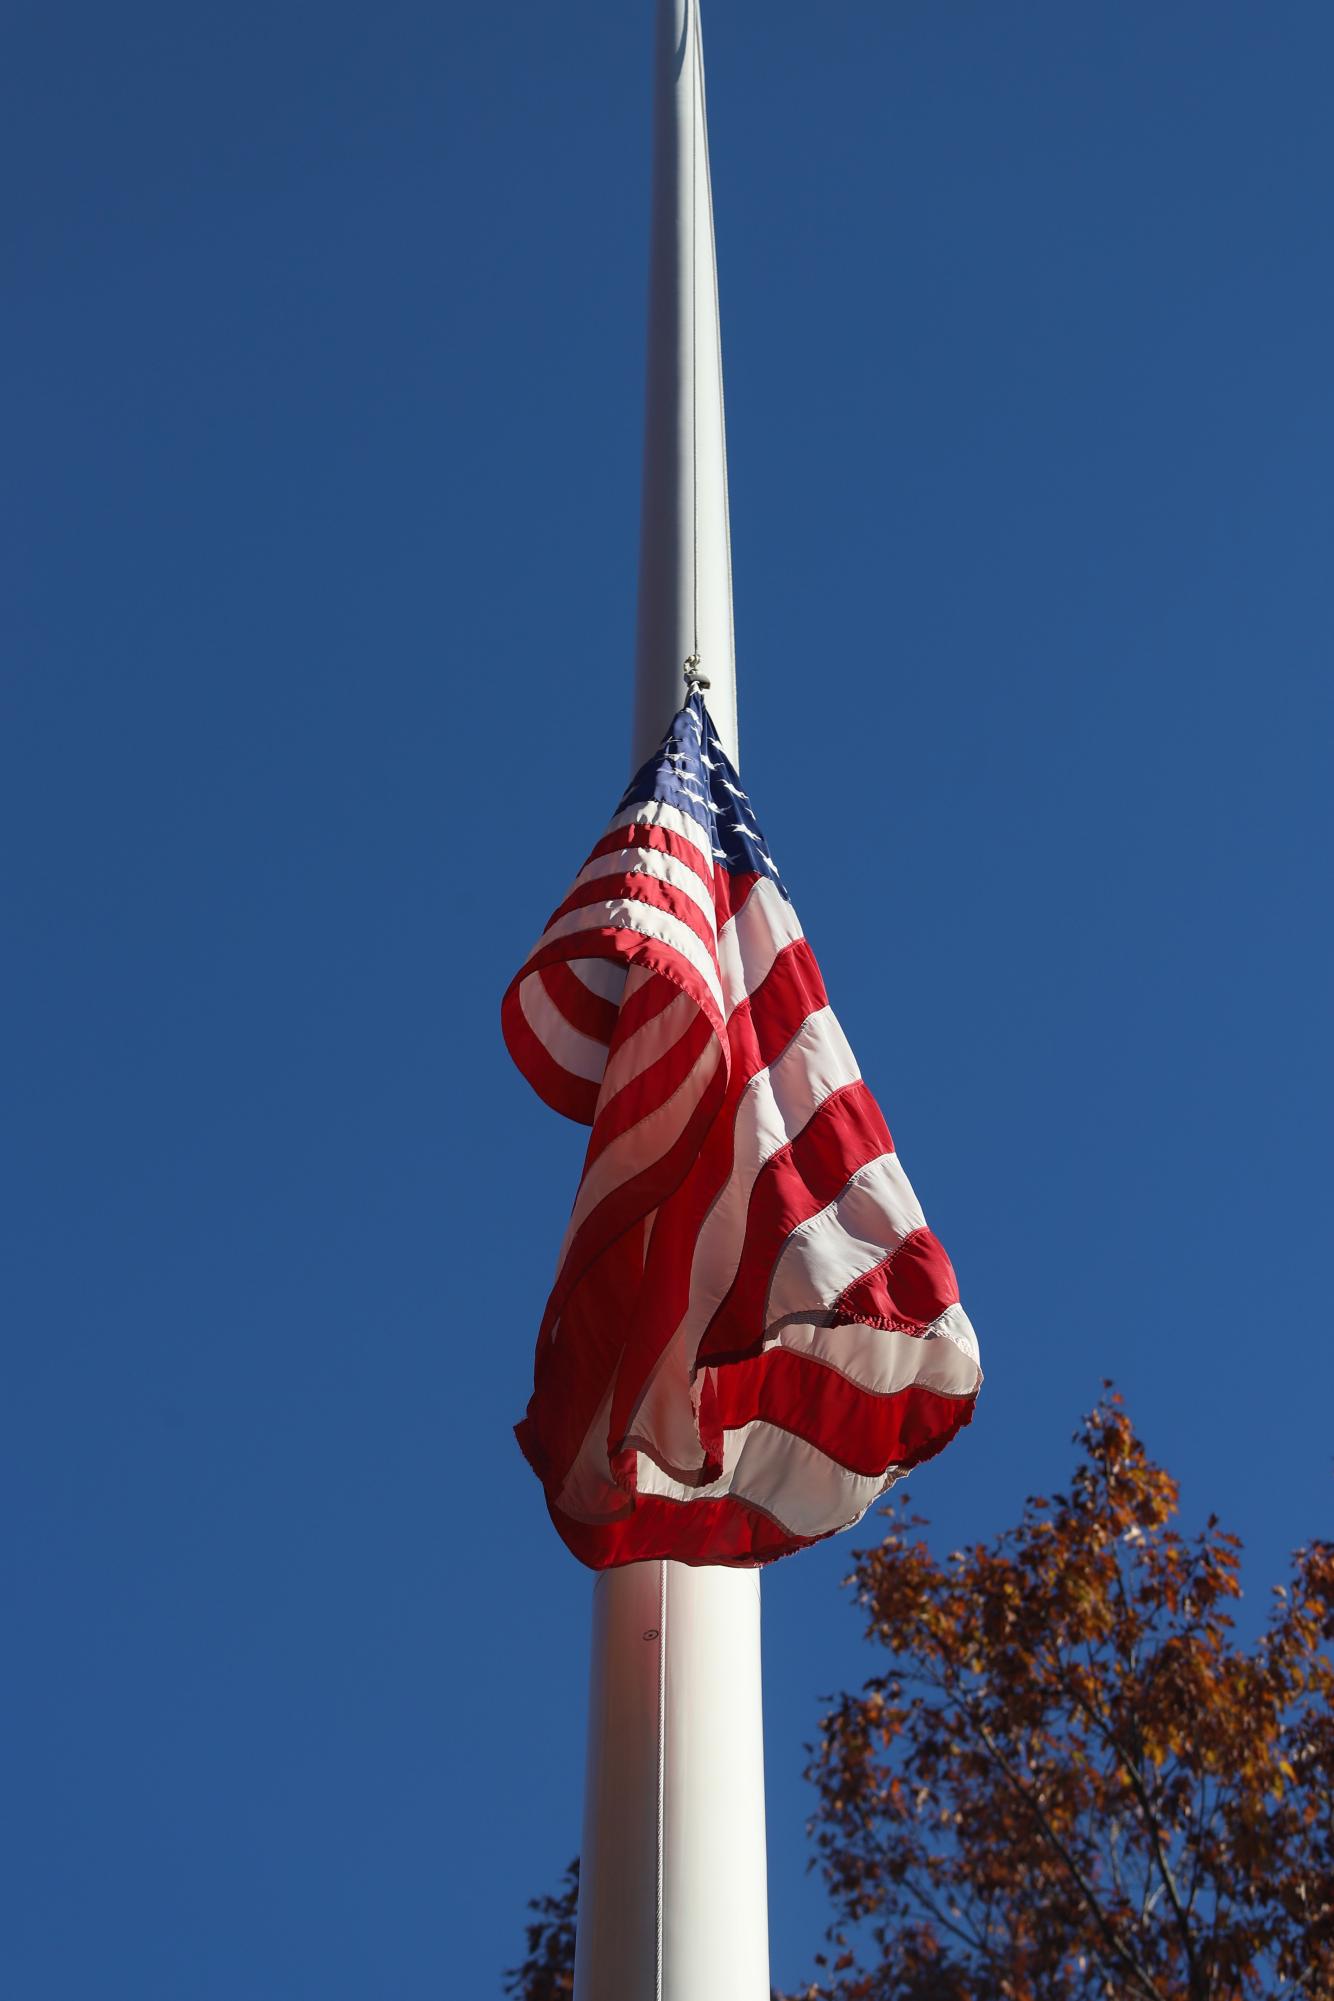 The flag on the Bates quad hangs at half staff after the mass shooting on Oct. 25. Carly Philpott/The Bates Student